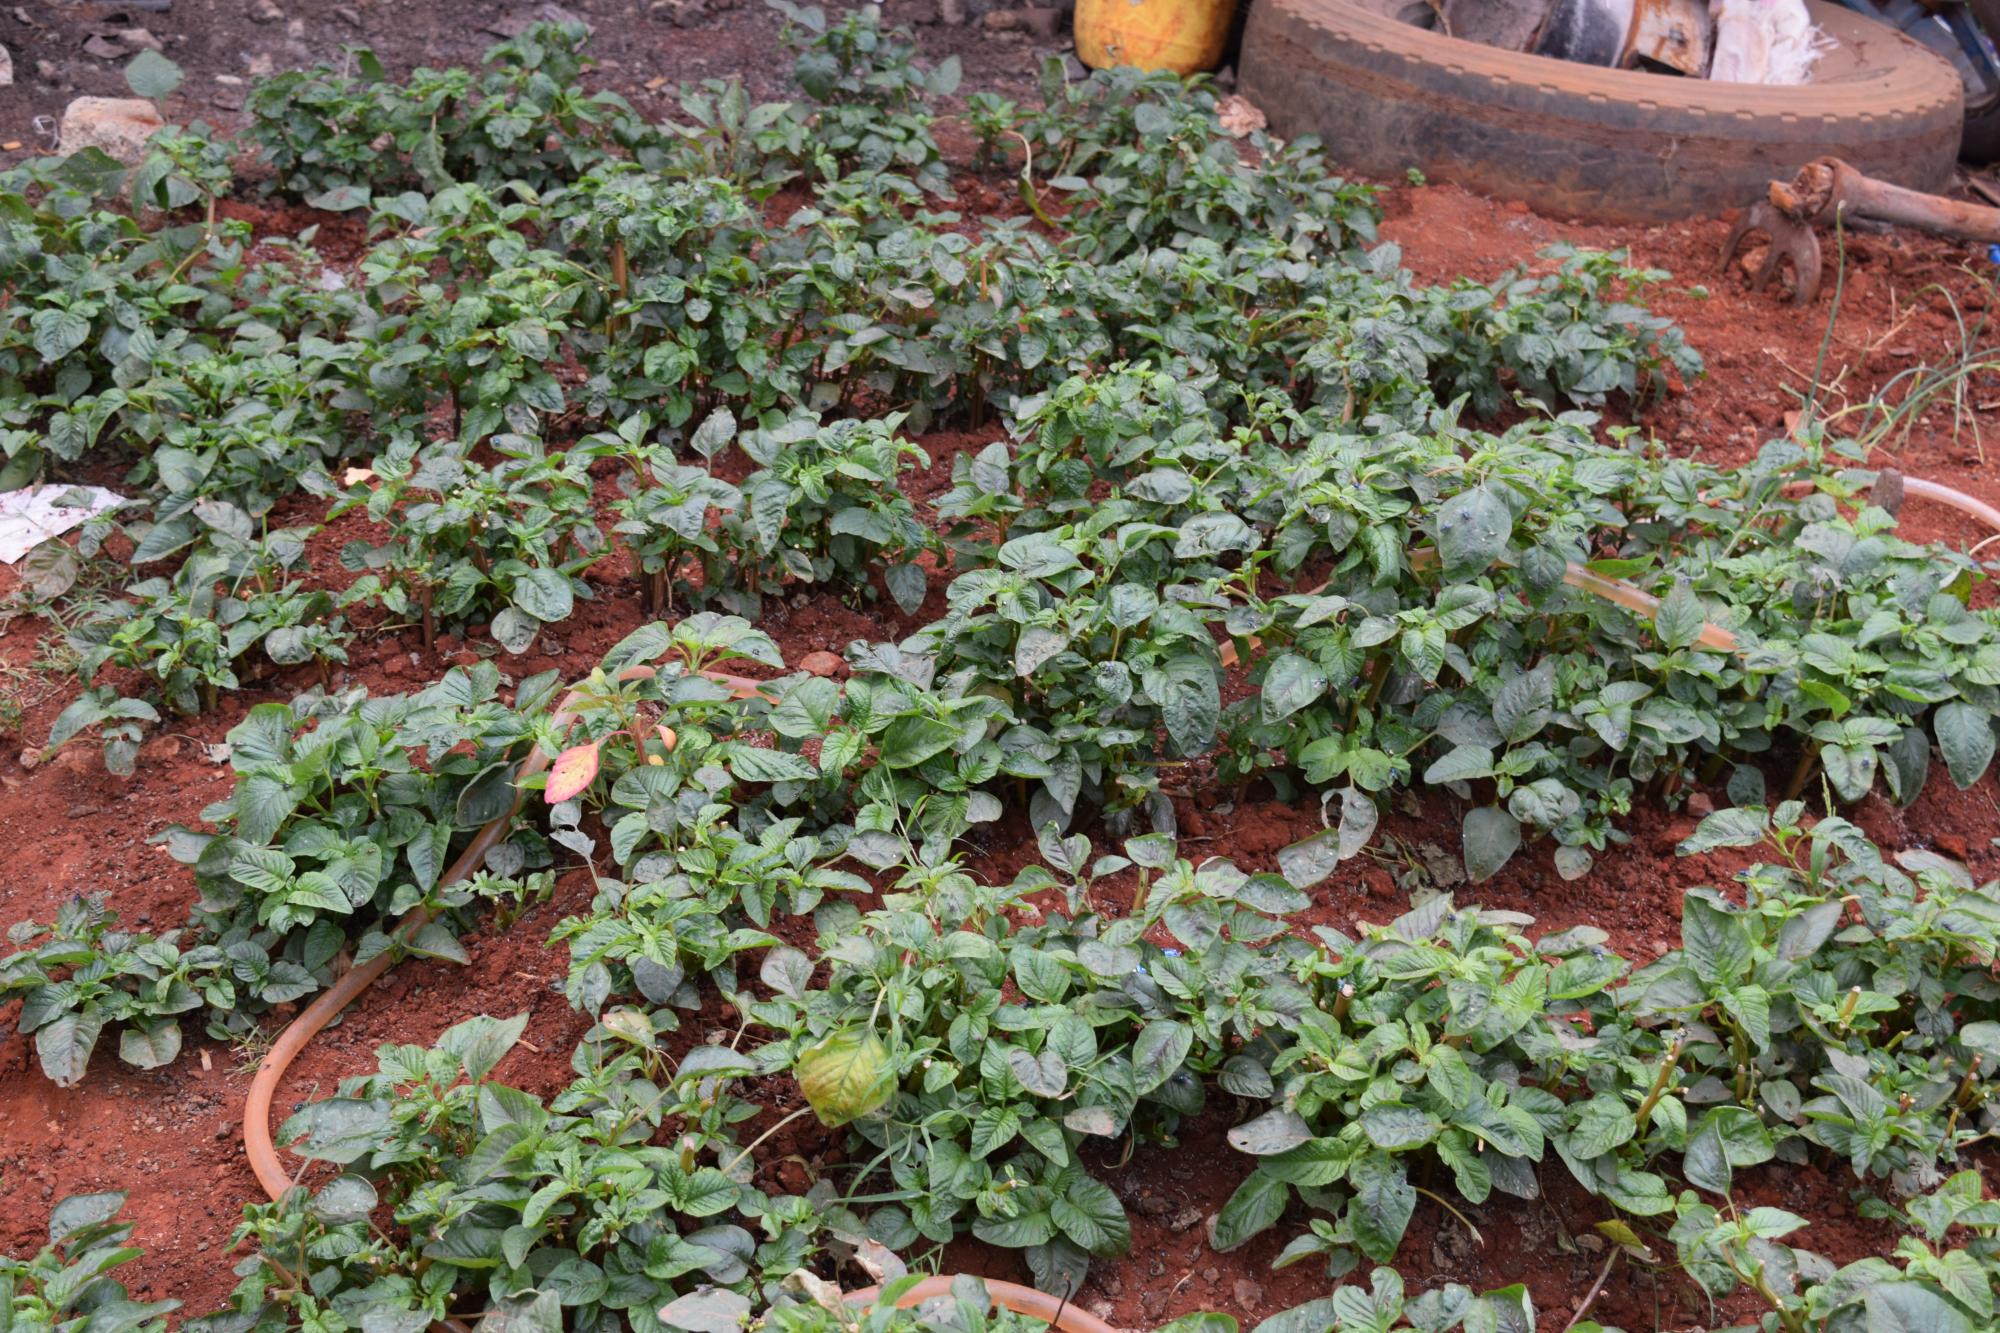 Photo 7: Traditional vegetables planted on the surface.